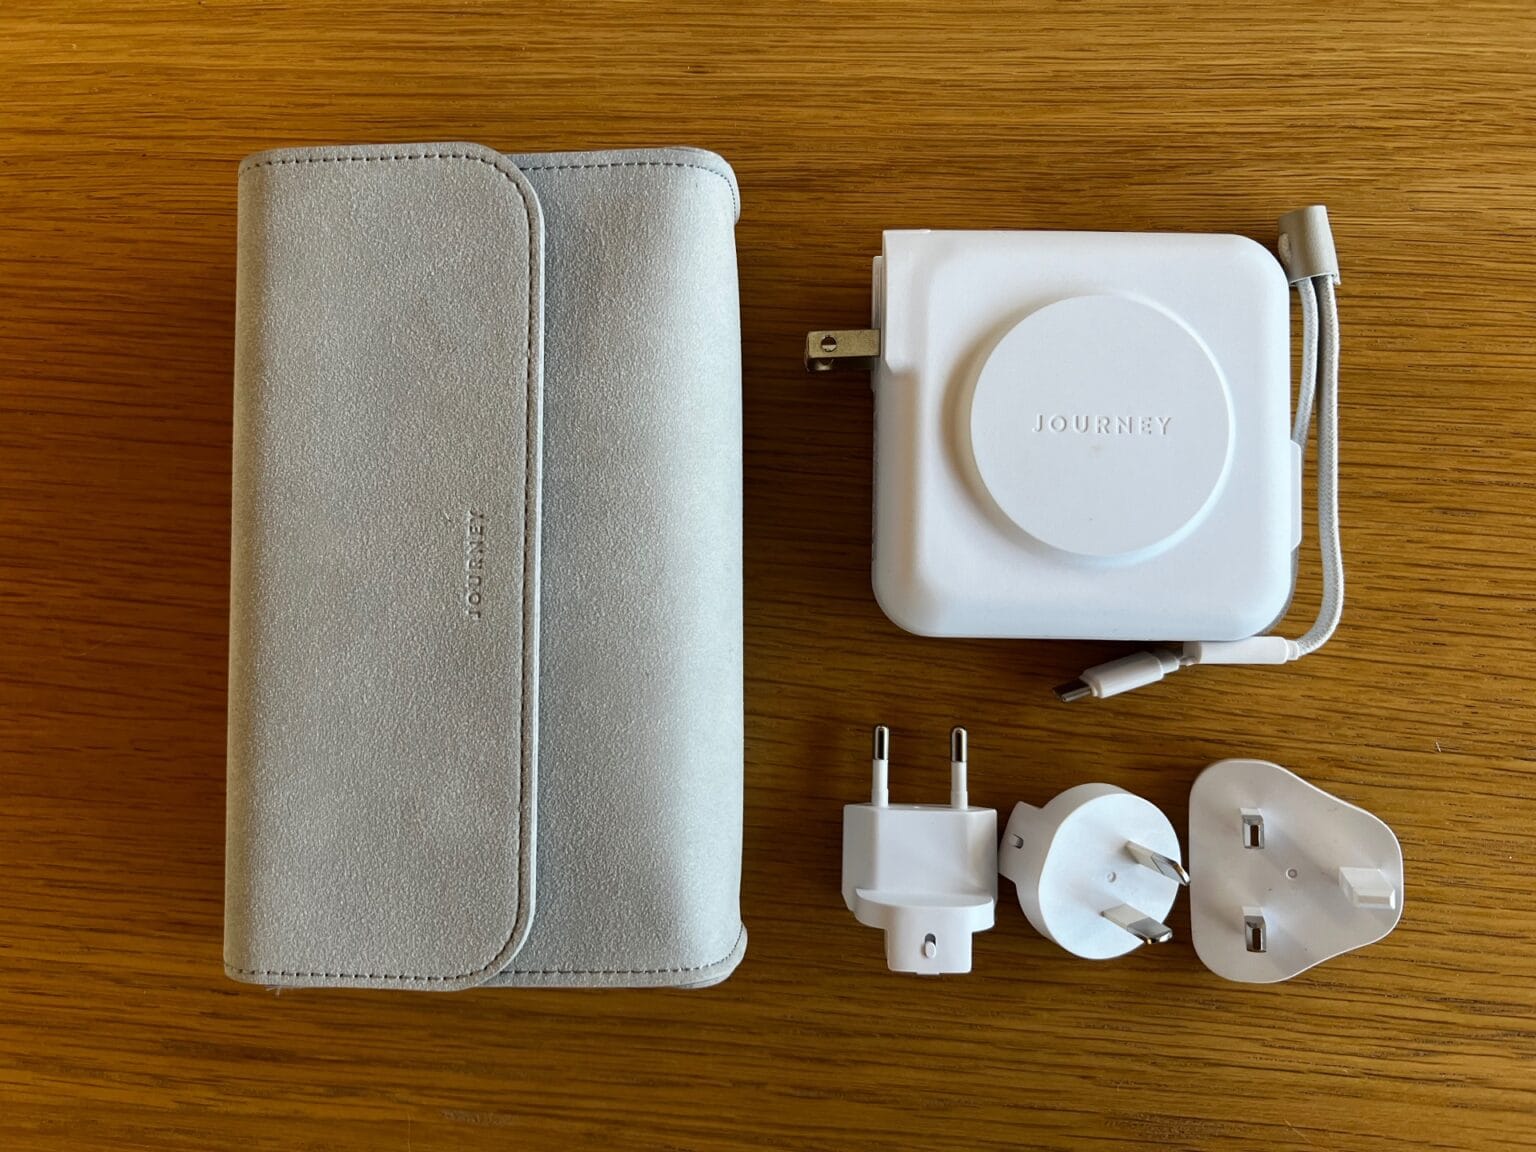 Journey Axie charger and power bank with international plugs and travel bag